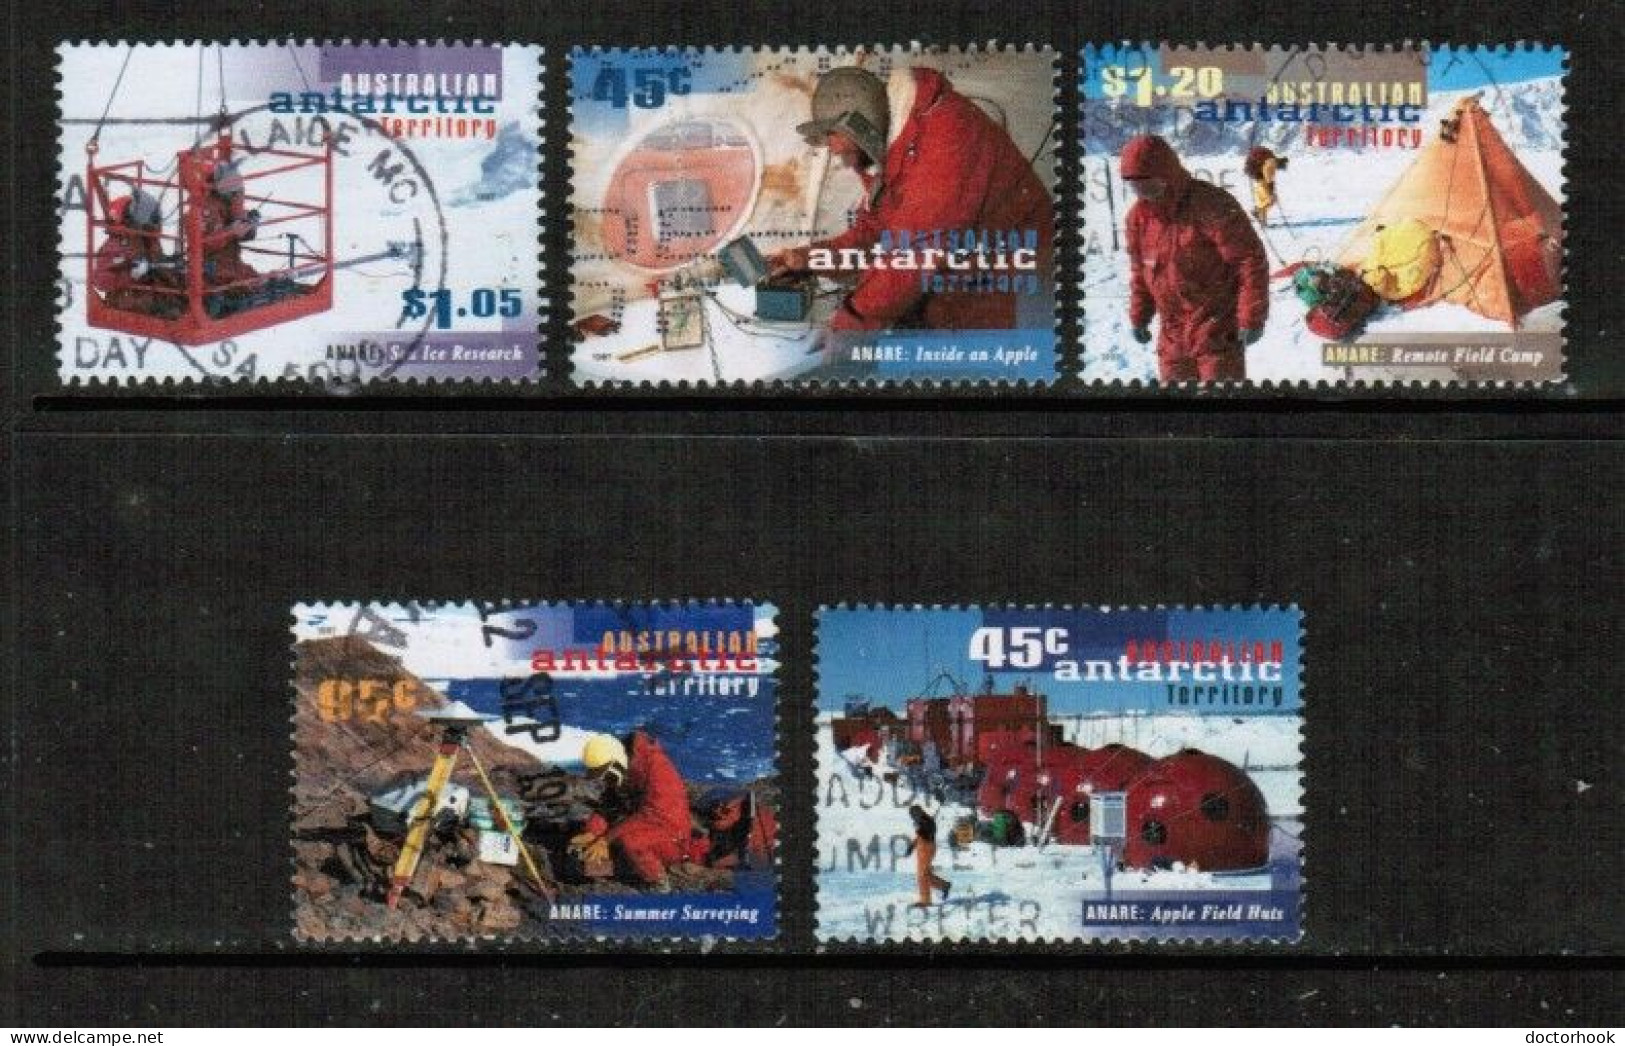 AUSTRALIAN ANTARCTIC TERRITORY   Scott # L 102-6 USED (CONDITION AS PER SCAN) (Stamp Scan # 929-9) - Oblitérés